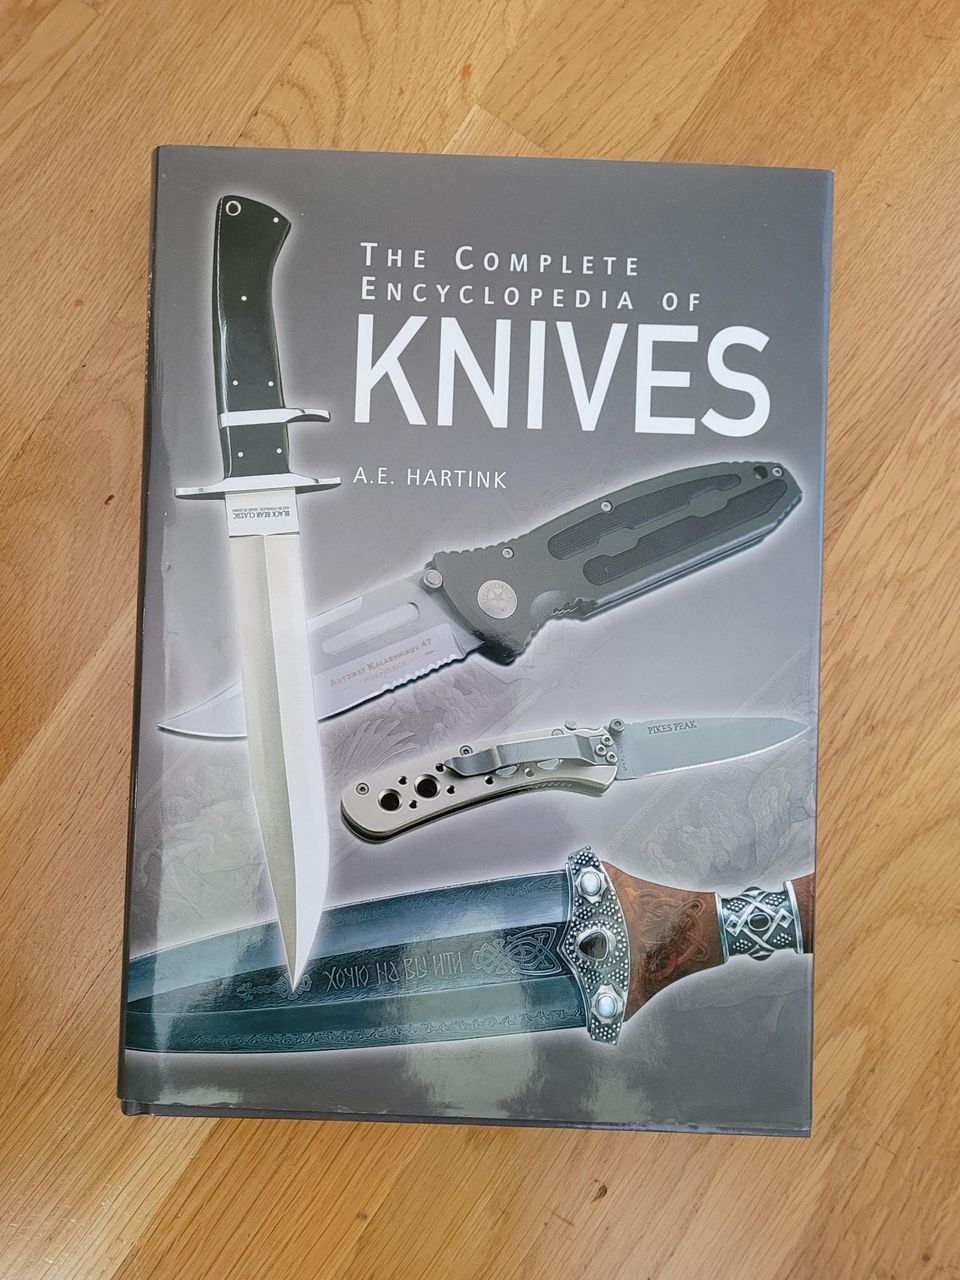 A. E. Hartink, The Complete Encyclopedia of Knives